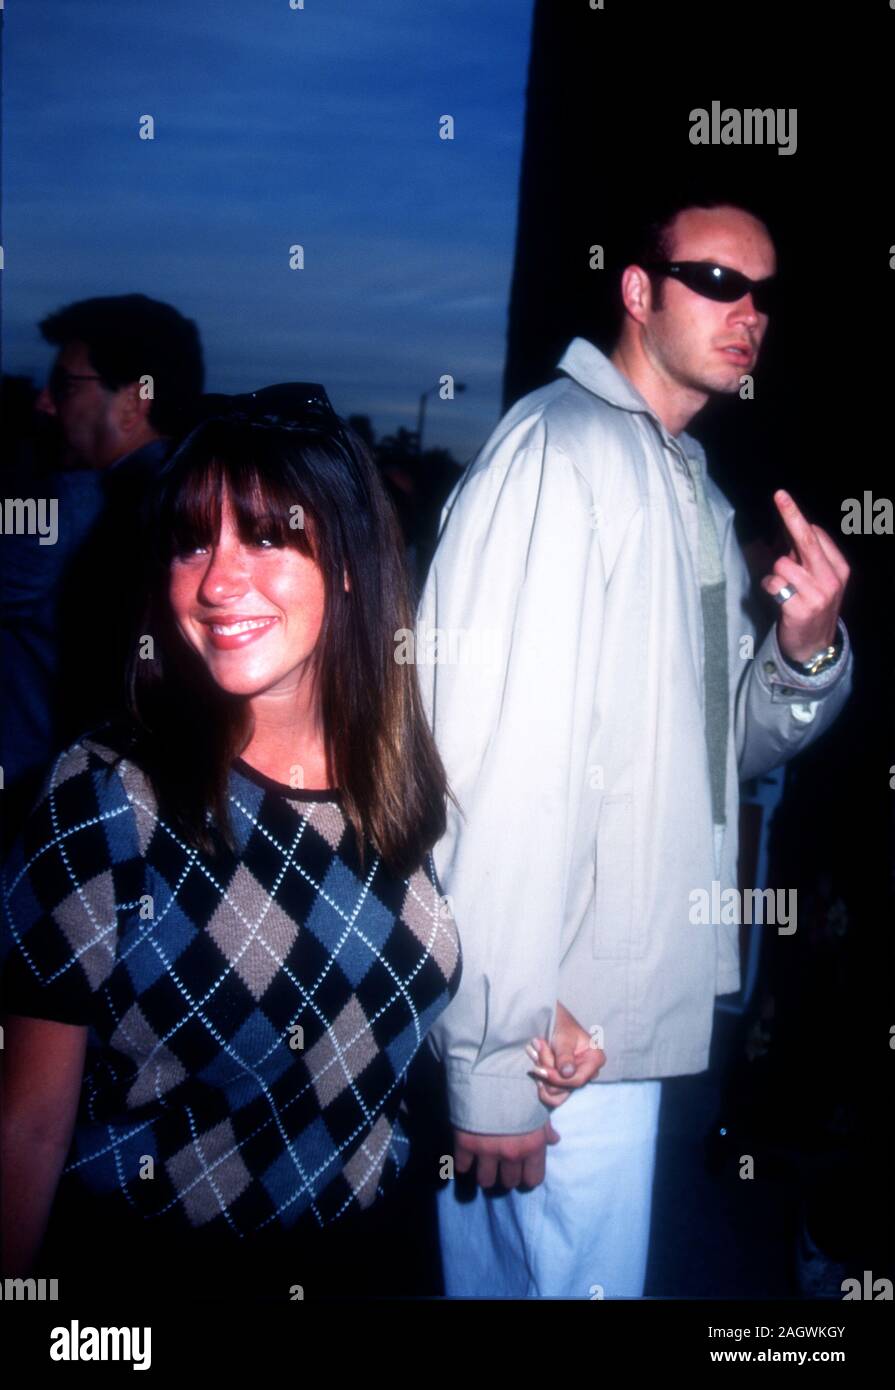 Westwood, California, USA 12th April 1995 Actress Soleil Moon Frye attends TriStar Pictures' 'Jury Duty' Premiere on April 12, 1995 at Avco Center Cinemas in Westwood, California, USA. Photo by Barry King/Alamy Stock Photo Stock Photo